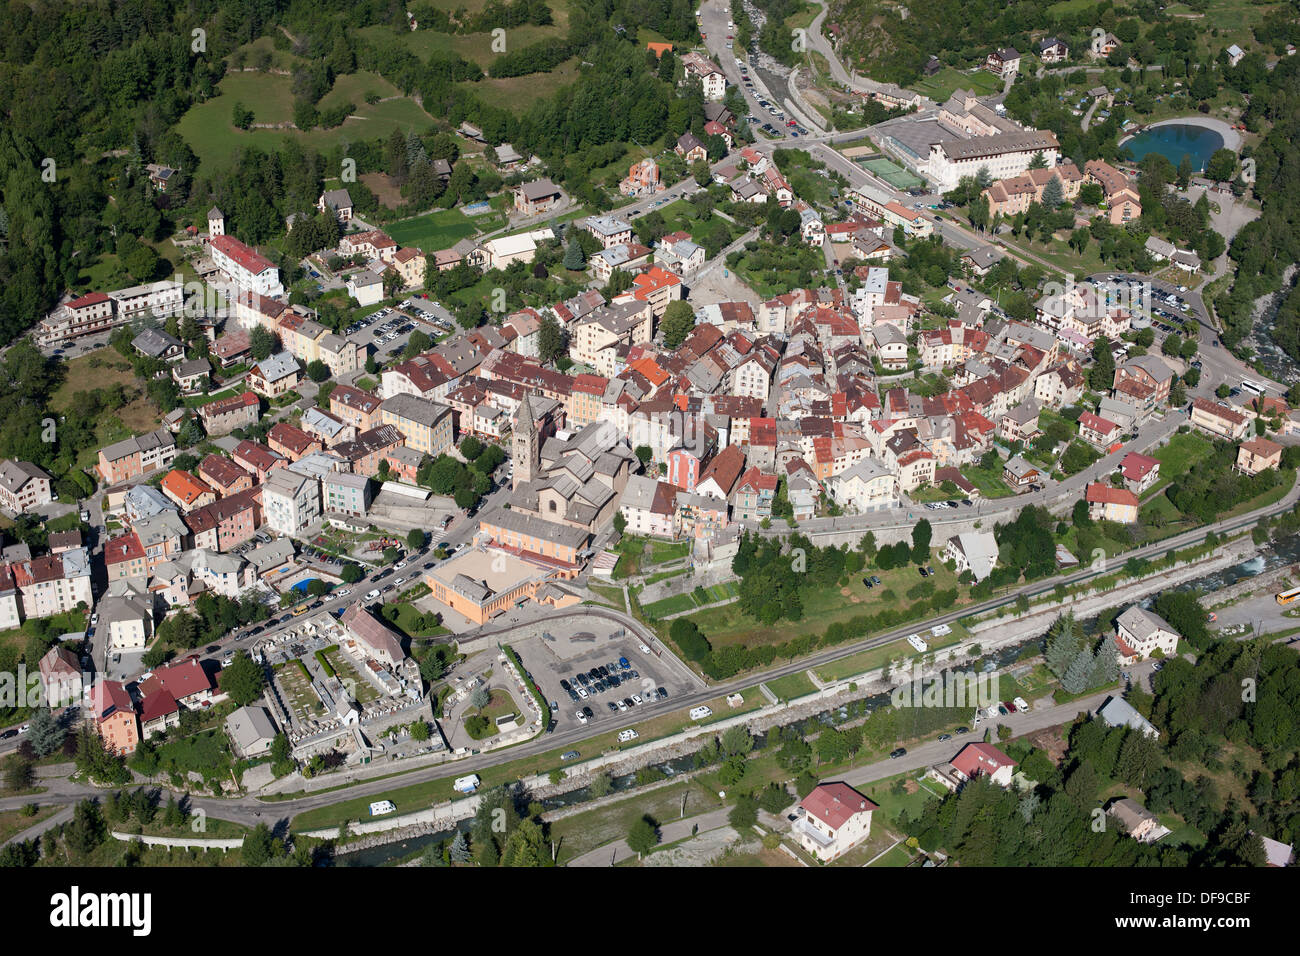 AERIAL VIEW. Small town in the upper Tinée Valley. Saint-Étienne-de-Tinée, French Riviera's hinterland, France. Stock Photo